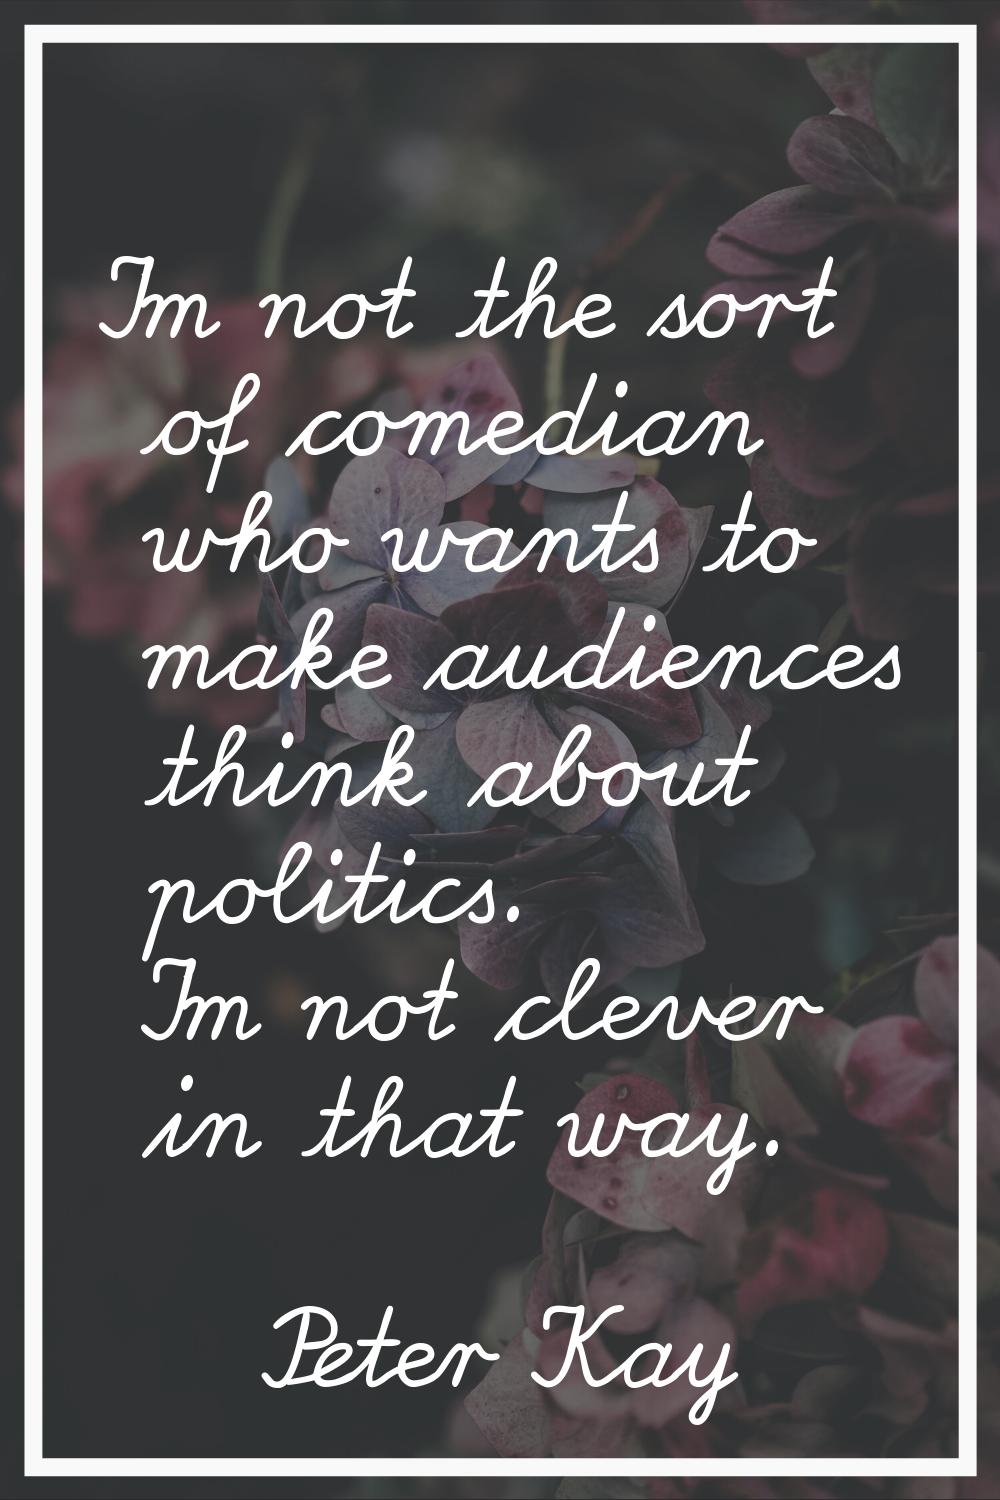 I'm not the sort of comedian who wants to make audiences think about politics. I'm not clever in th